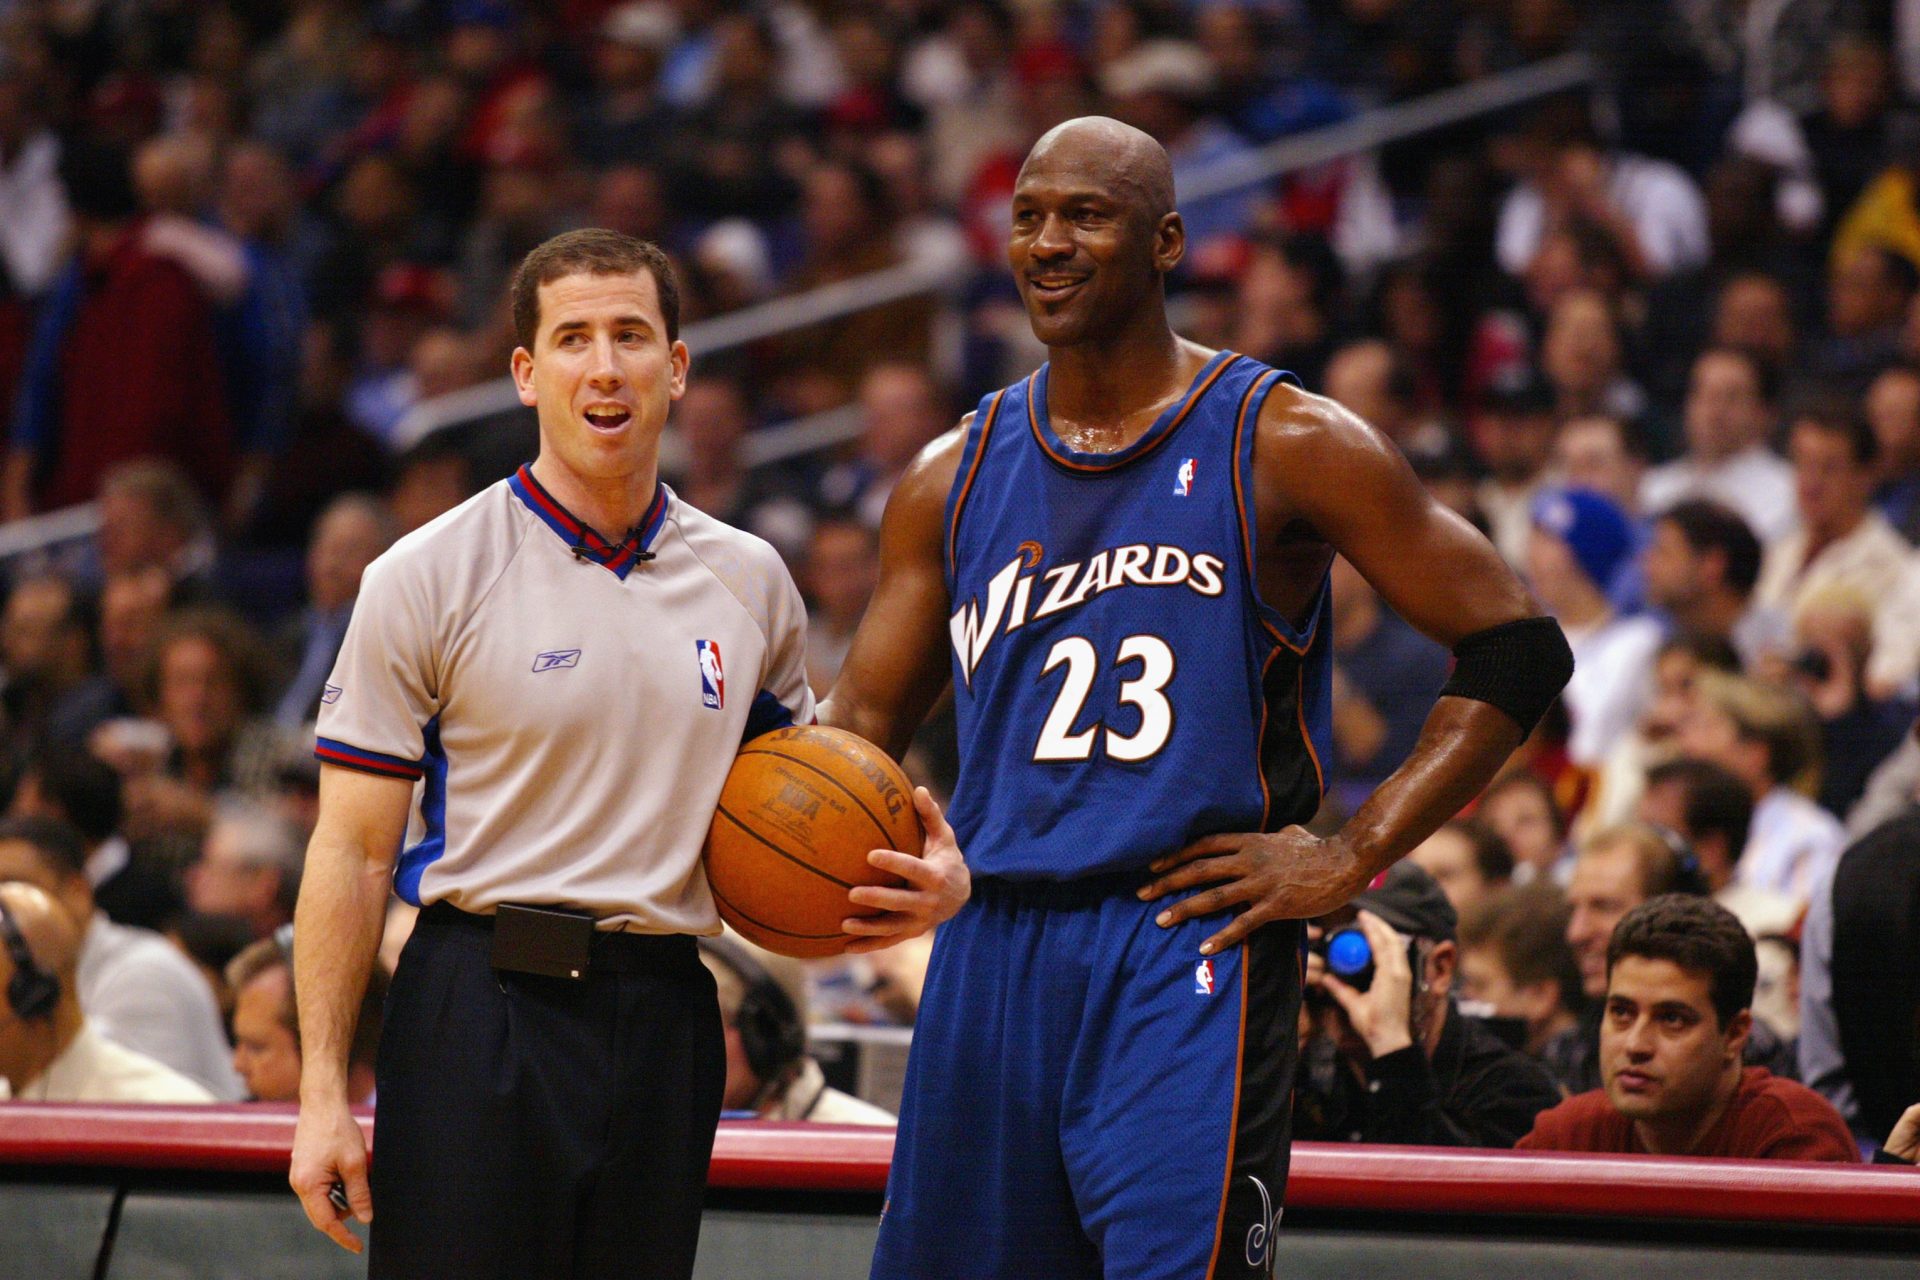 What happened to embattled NBA ref Tim Donaghy? Imprisoned for alleged game fixing